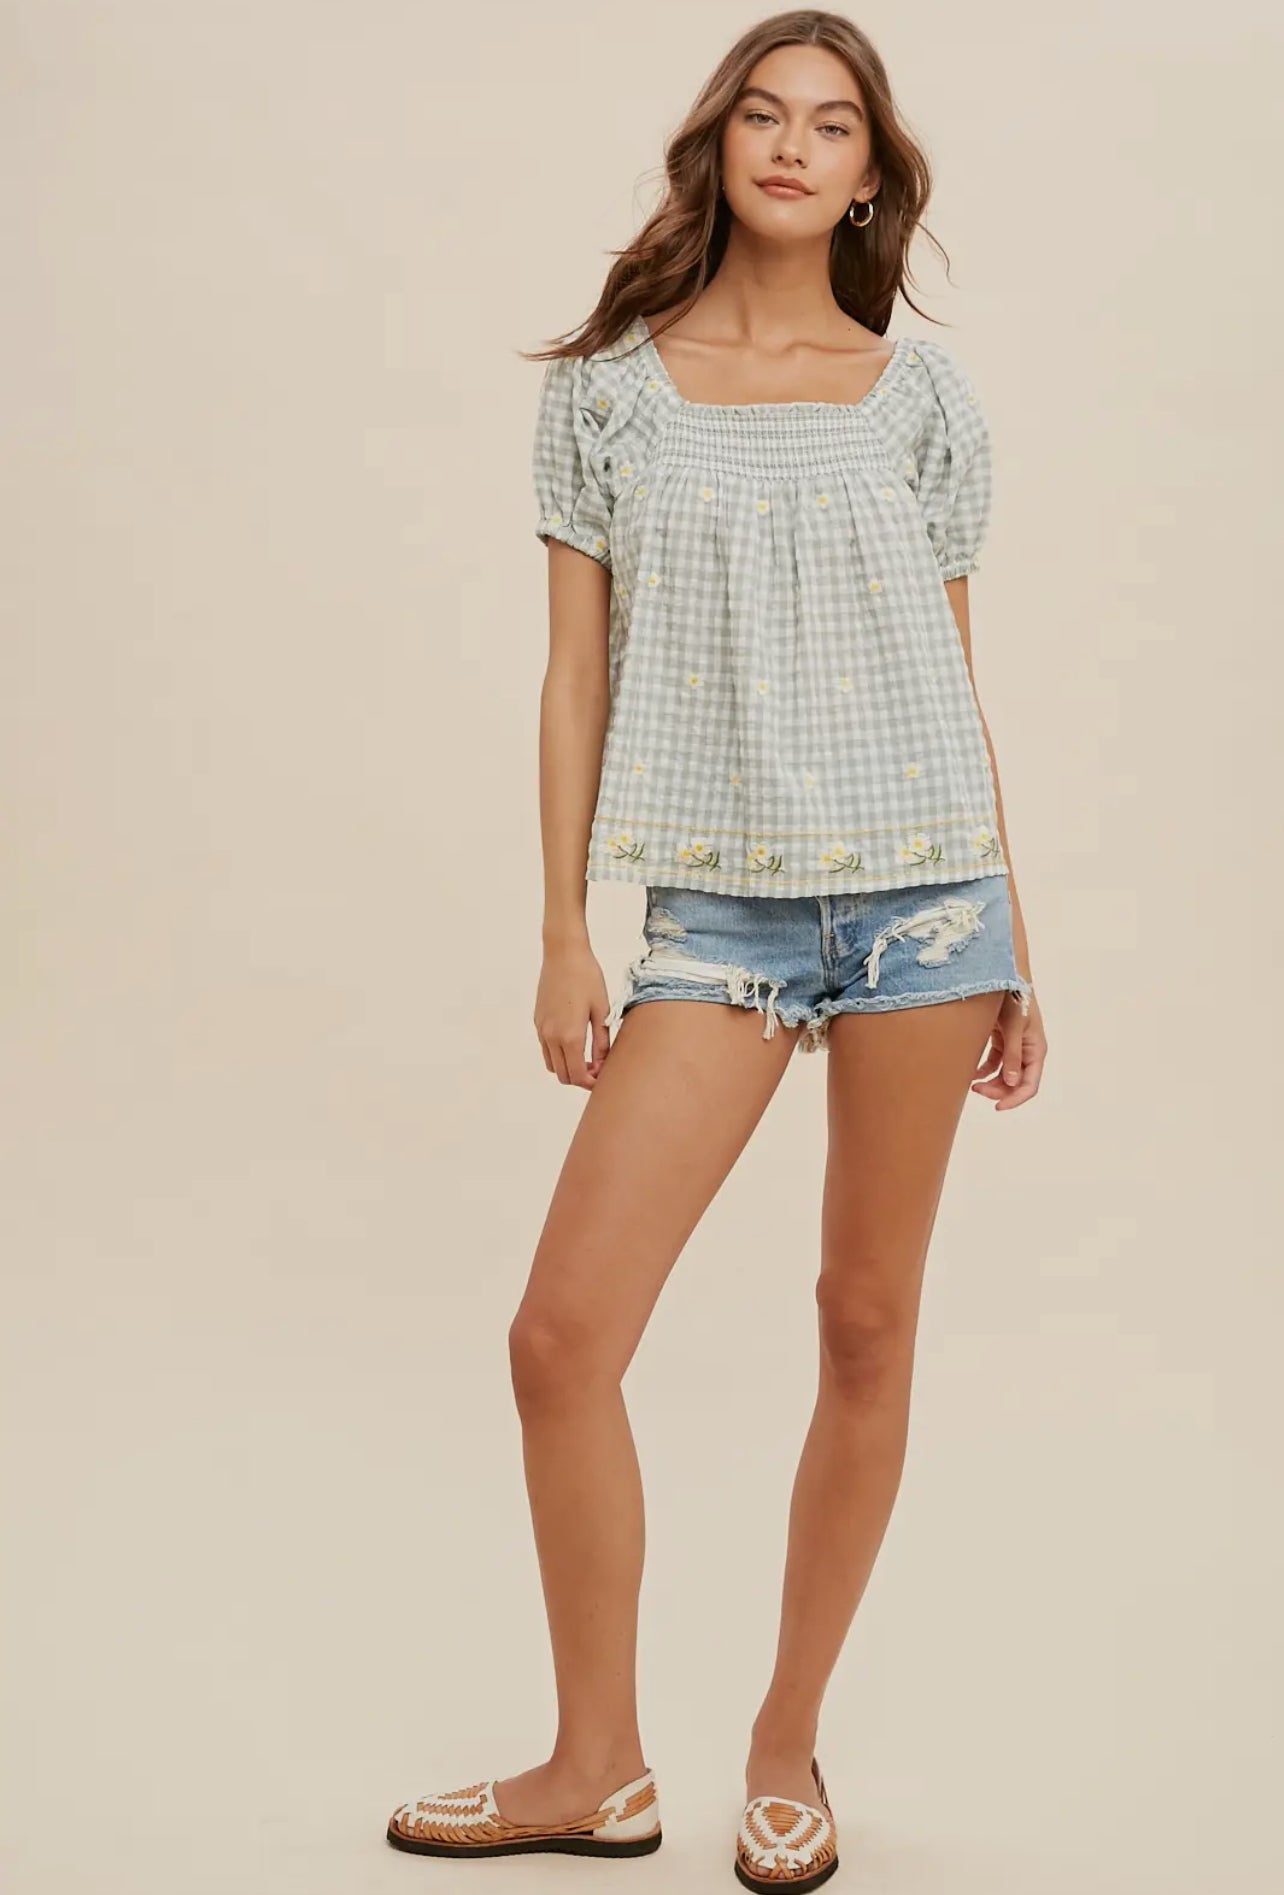 Gingham Embroidered Top